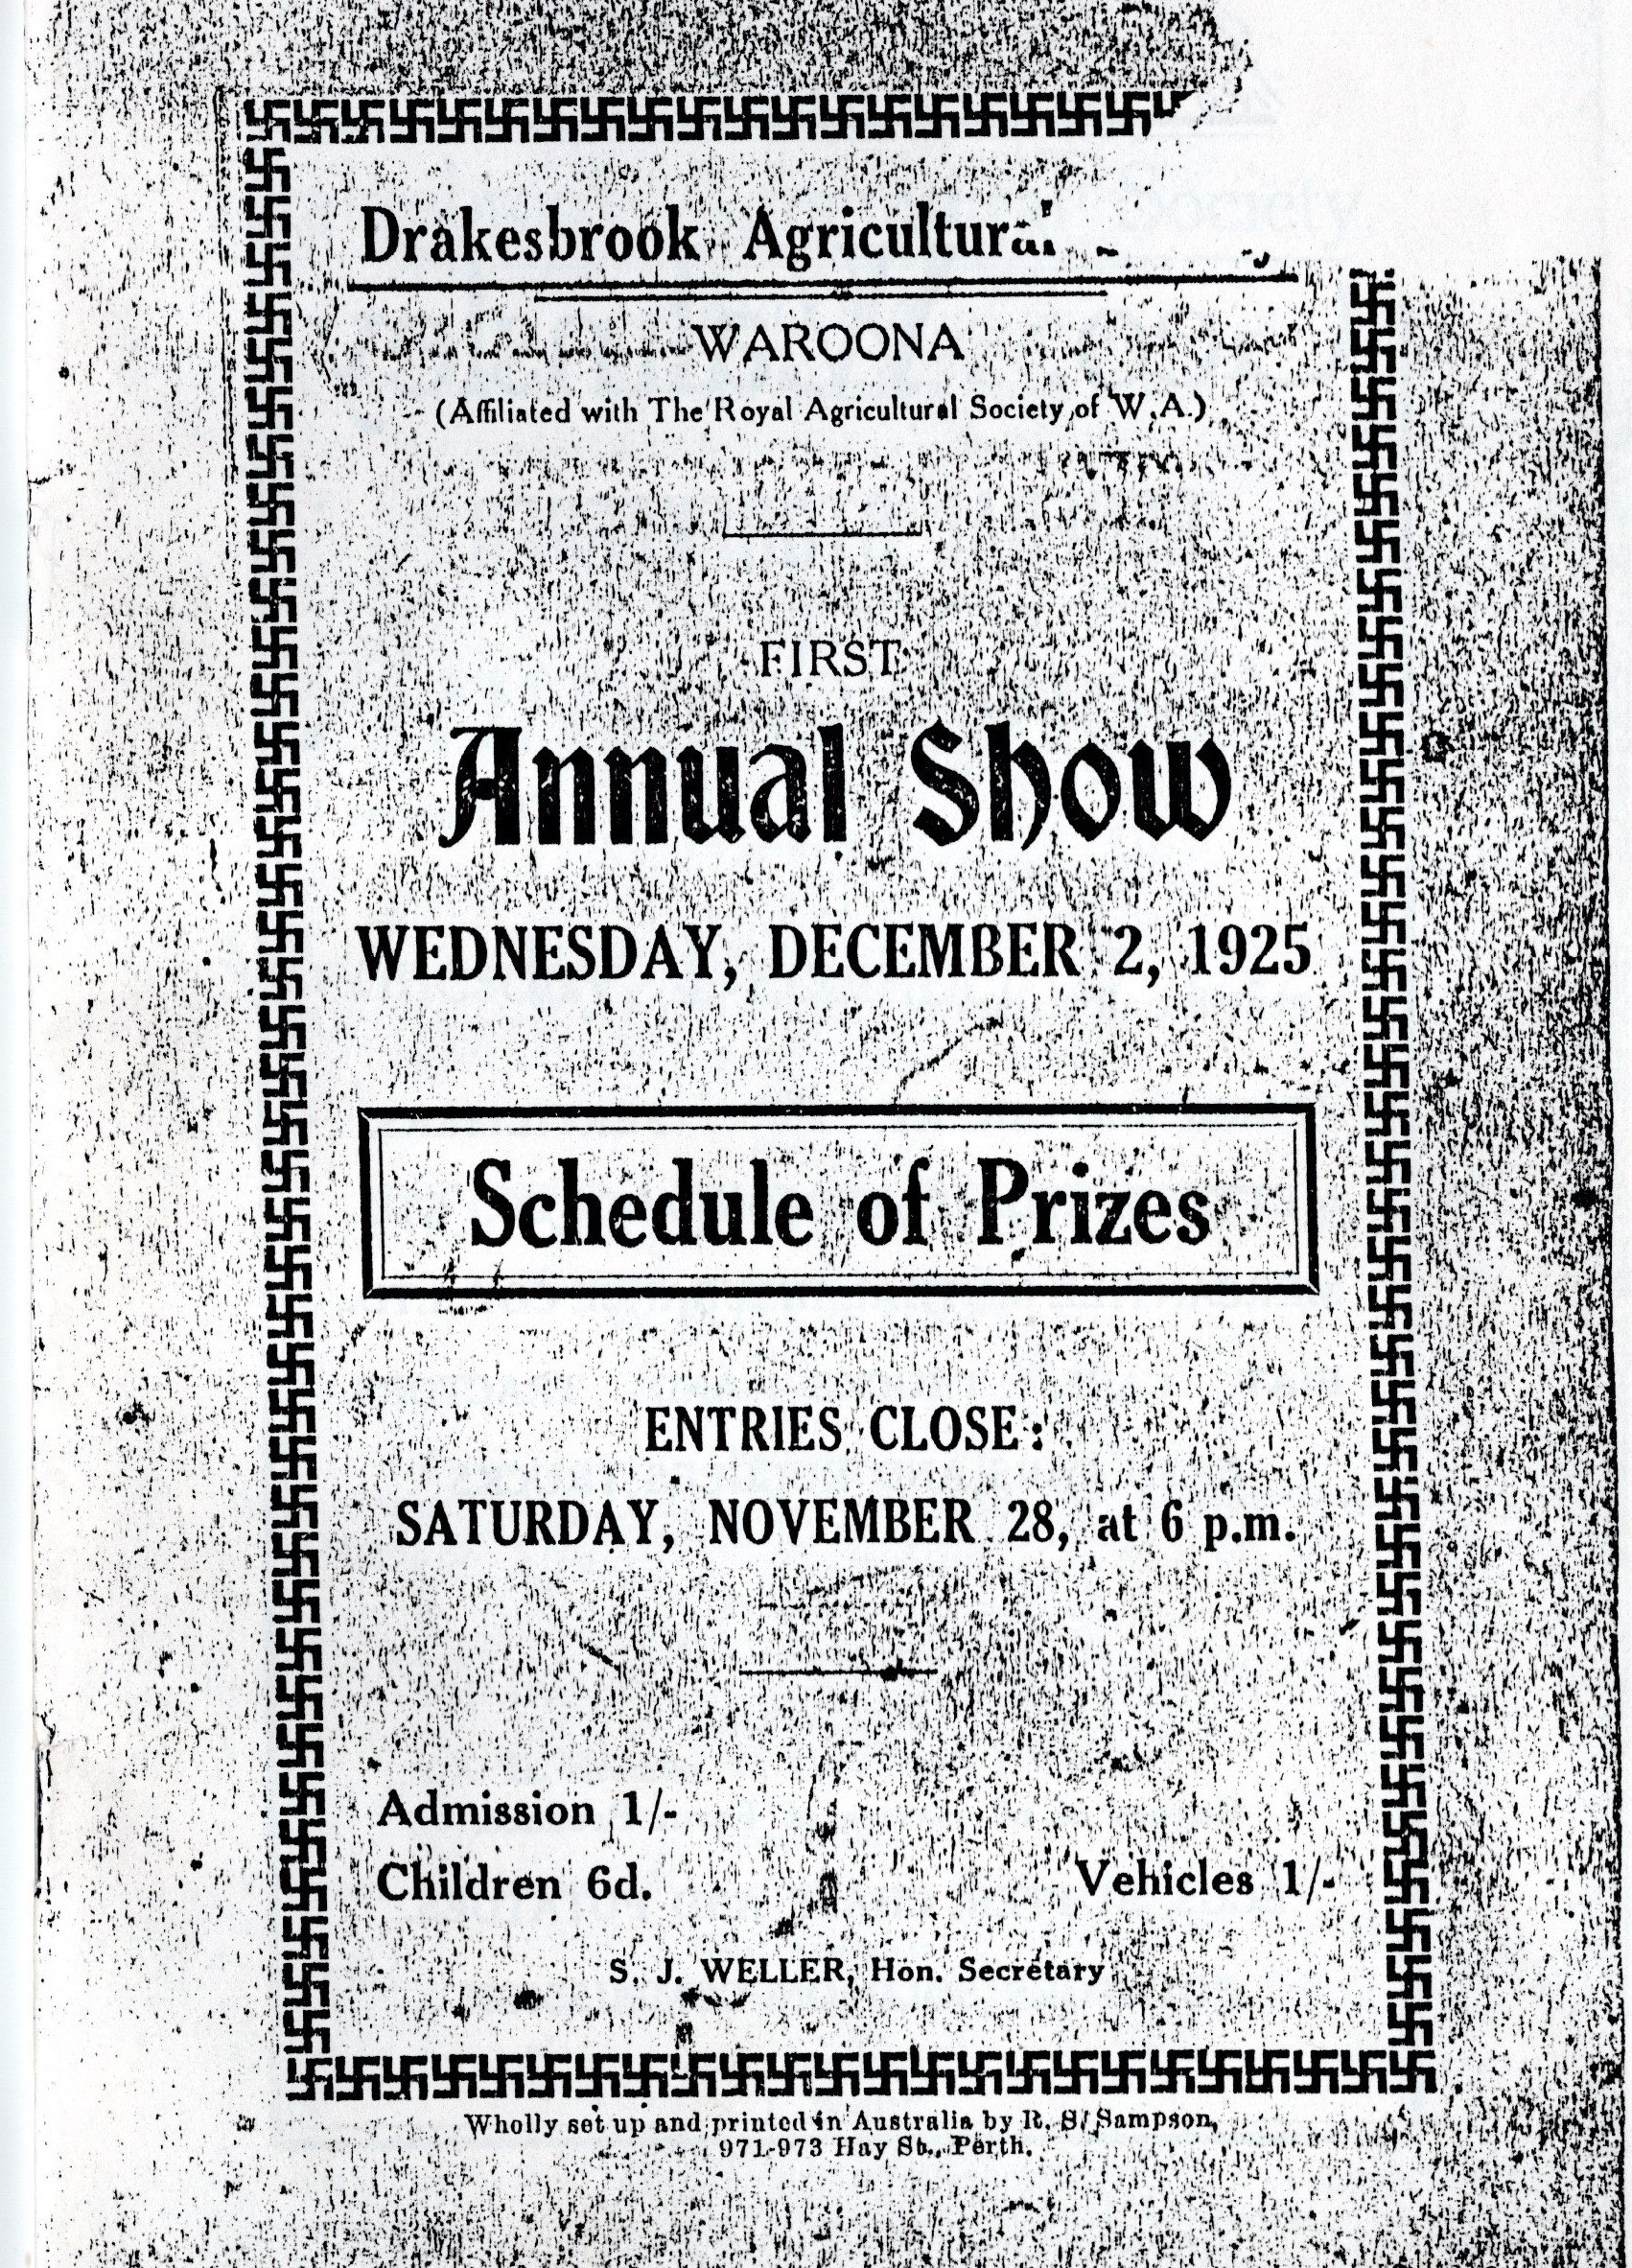 1925 Drakesbrook Agricultural Society Show Book front page20220613 (3)